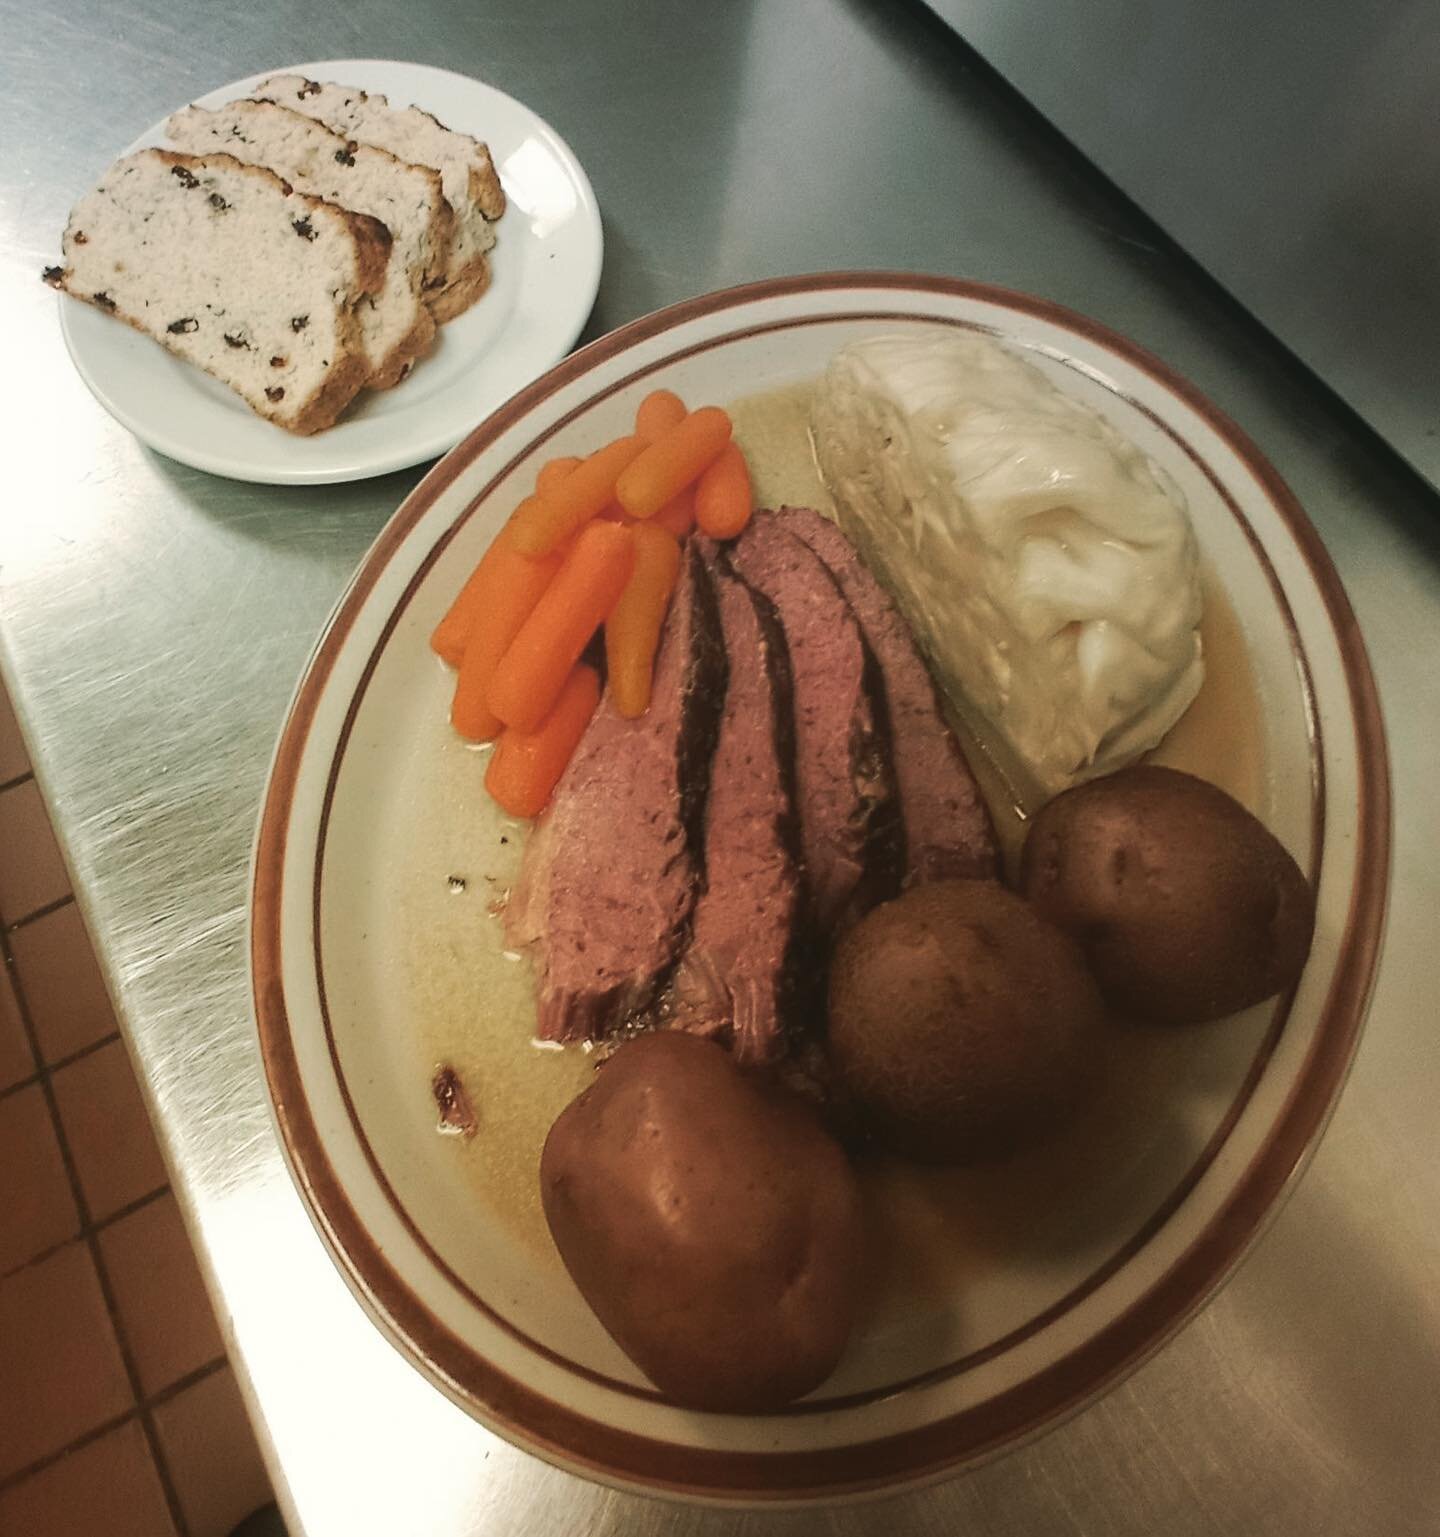 St Patty&rsquo;s Day this Friday March 17!! &quot;Traditional Irish Boil&quot;
Corned Beef
Cabbage
Red potatoes
Carrots
Raisin and caraway seed soda bread